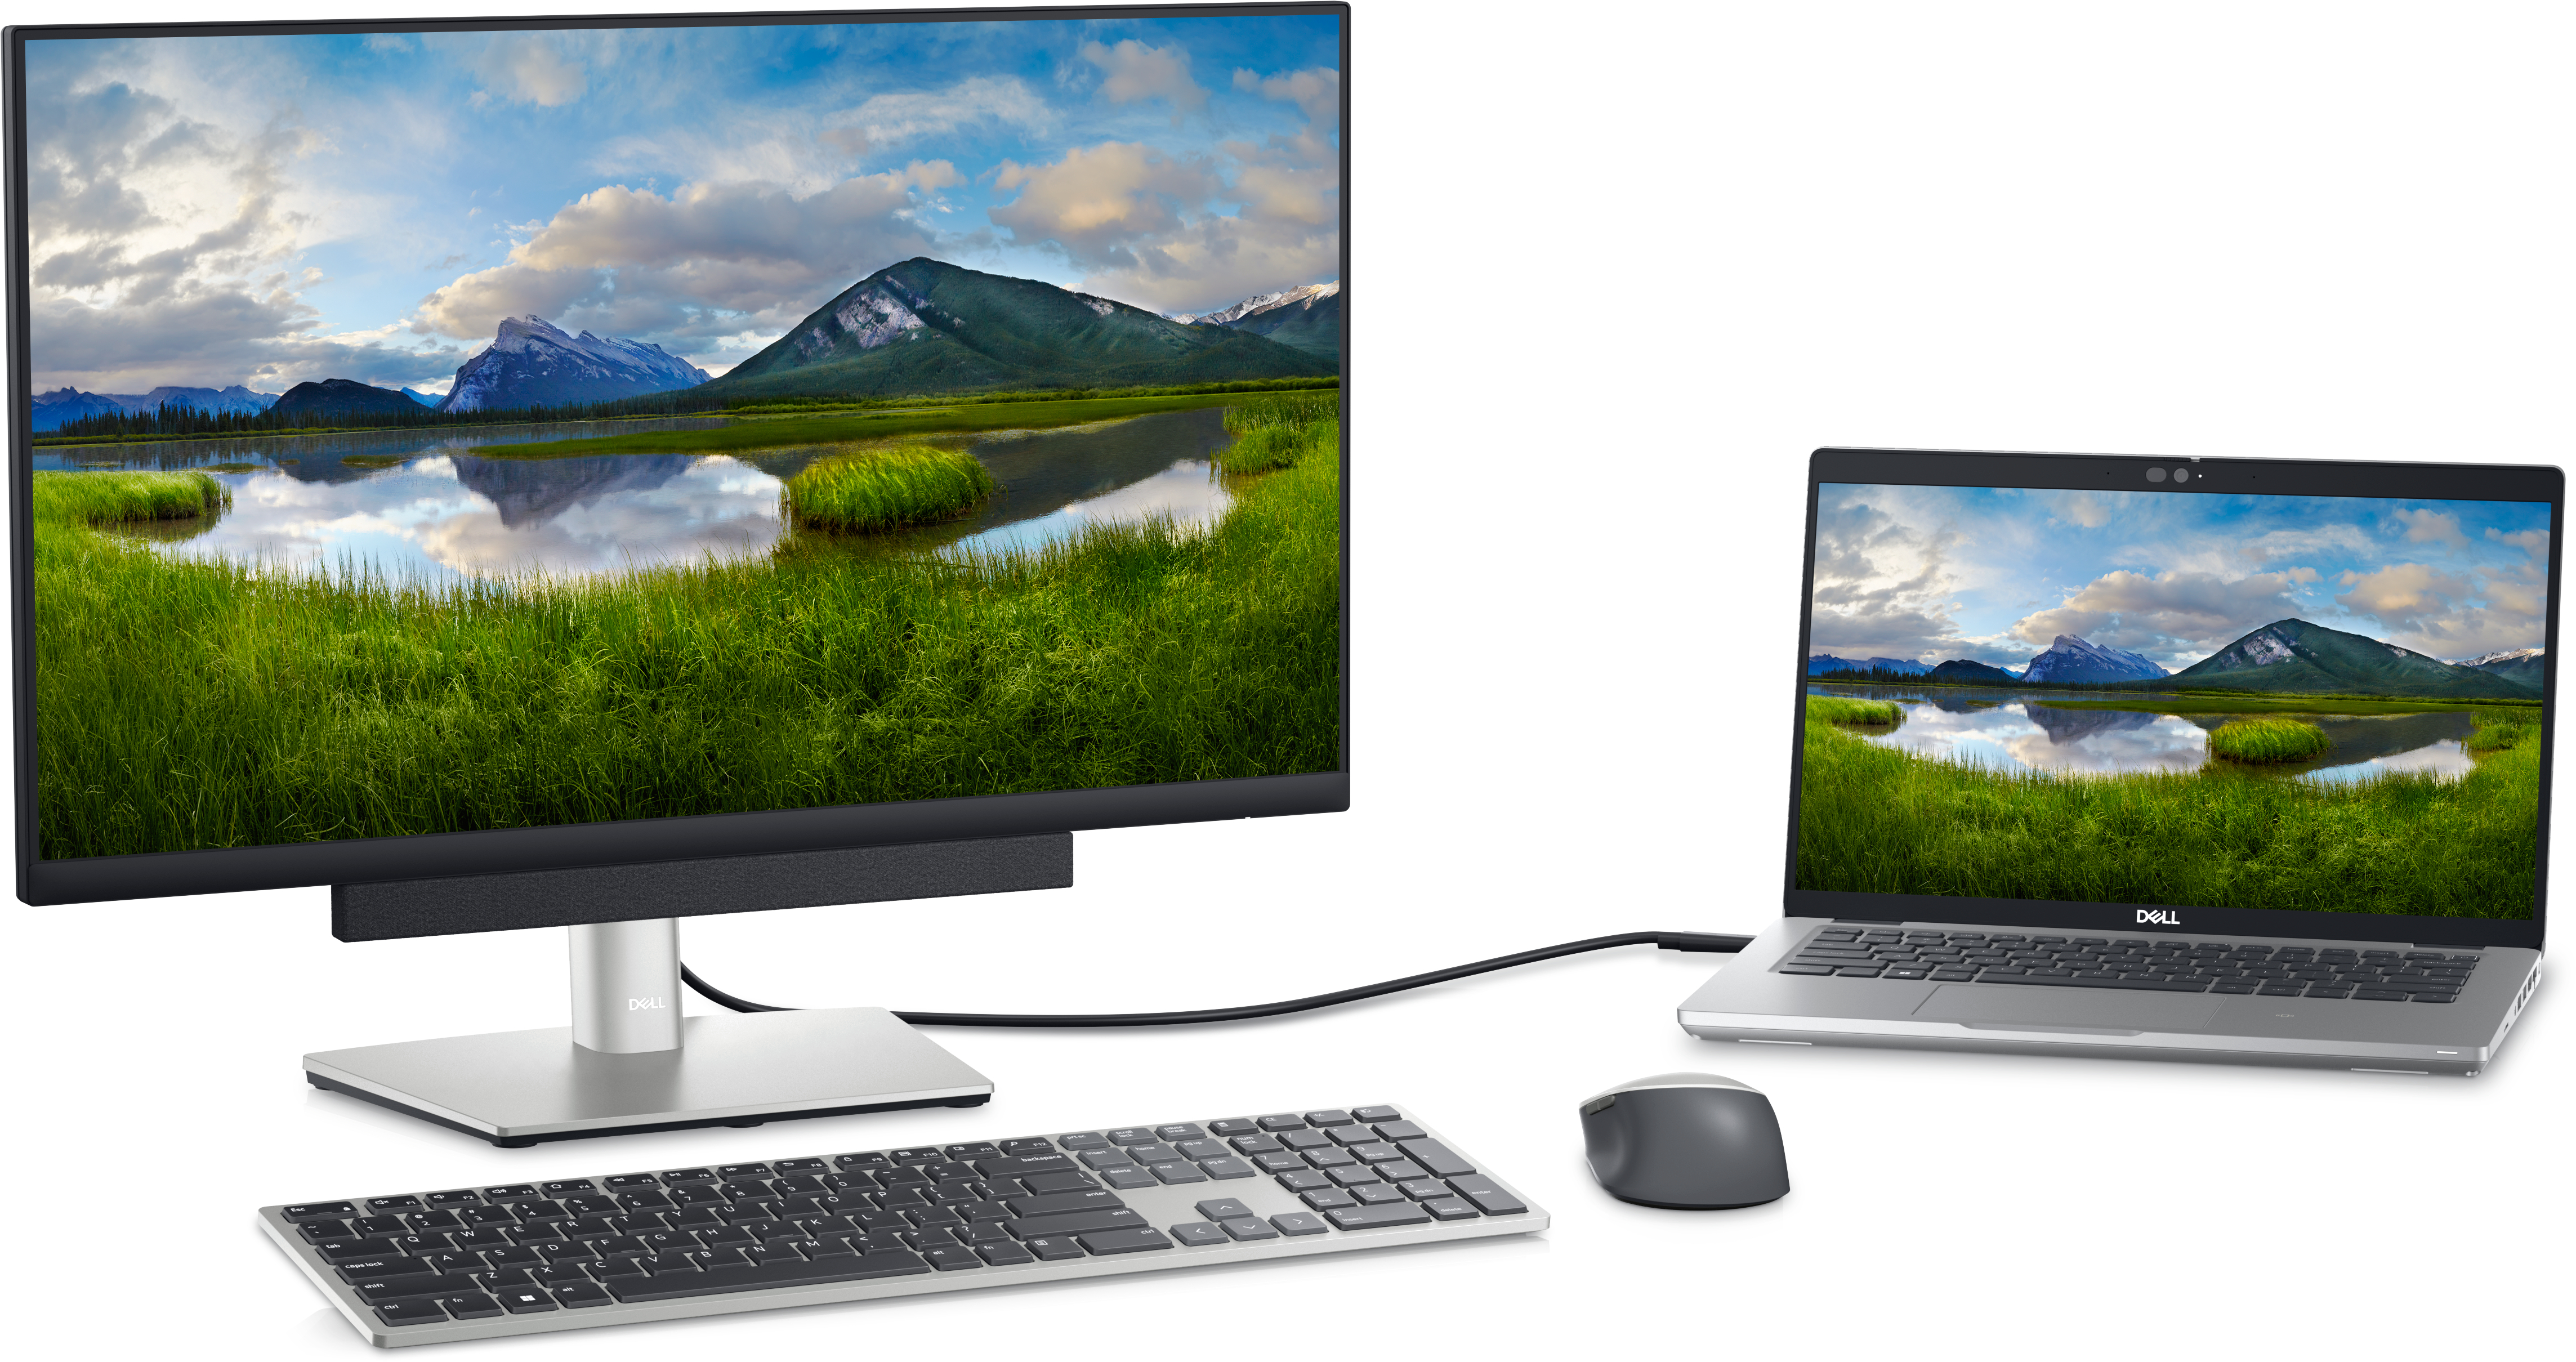 How to Resolve Monitor or Laptop Display Issues | Dell US